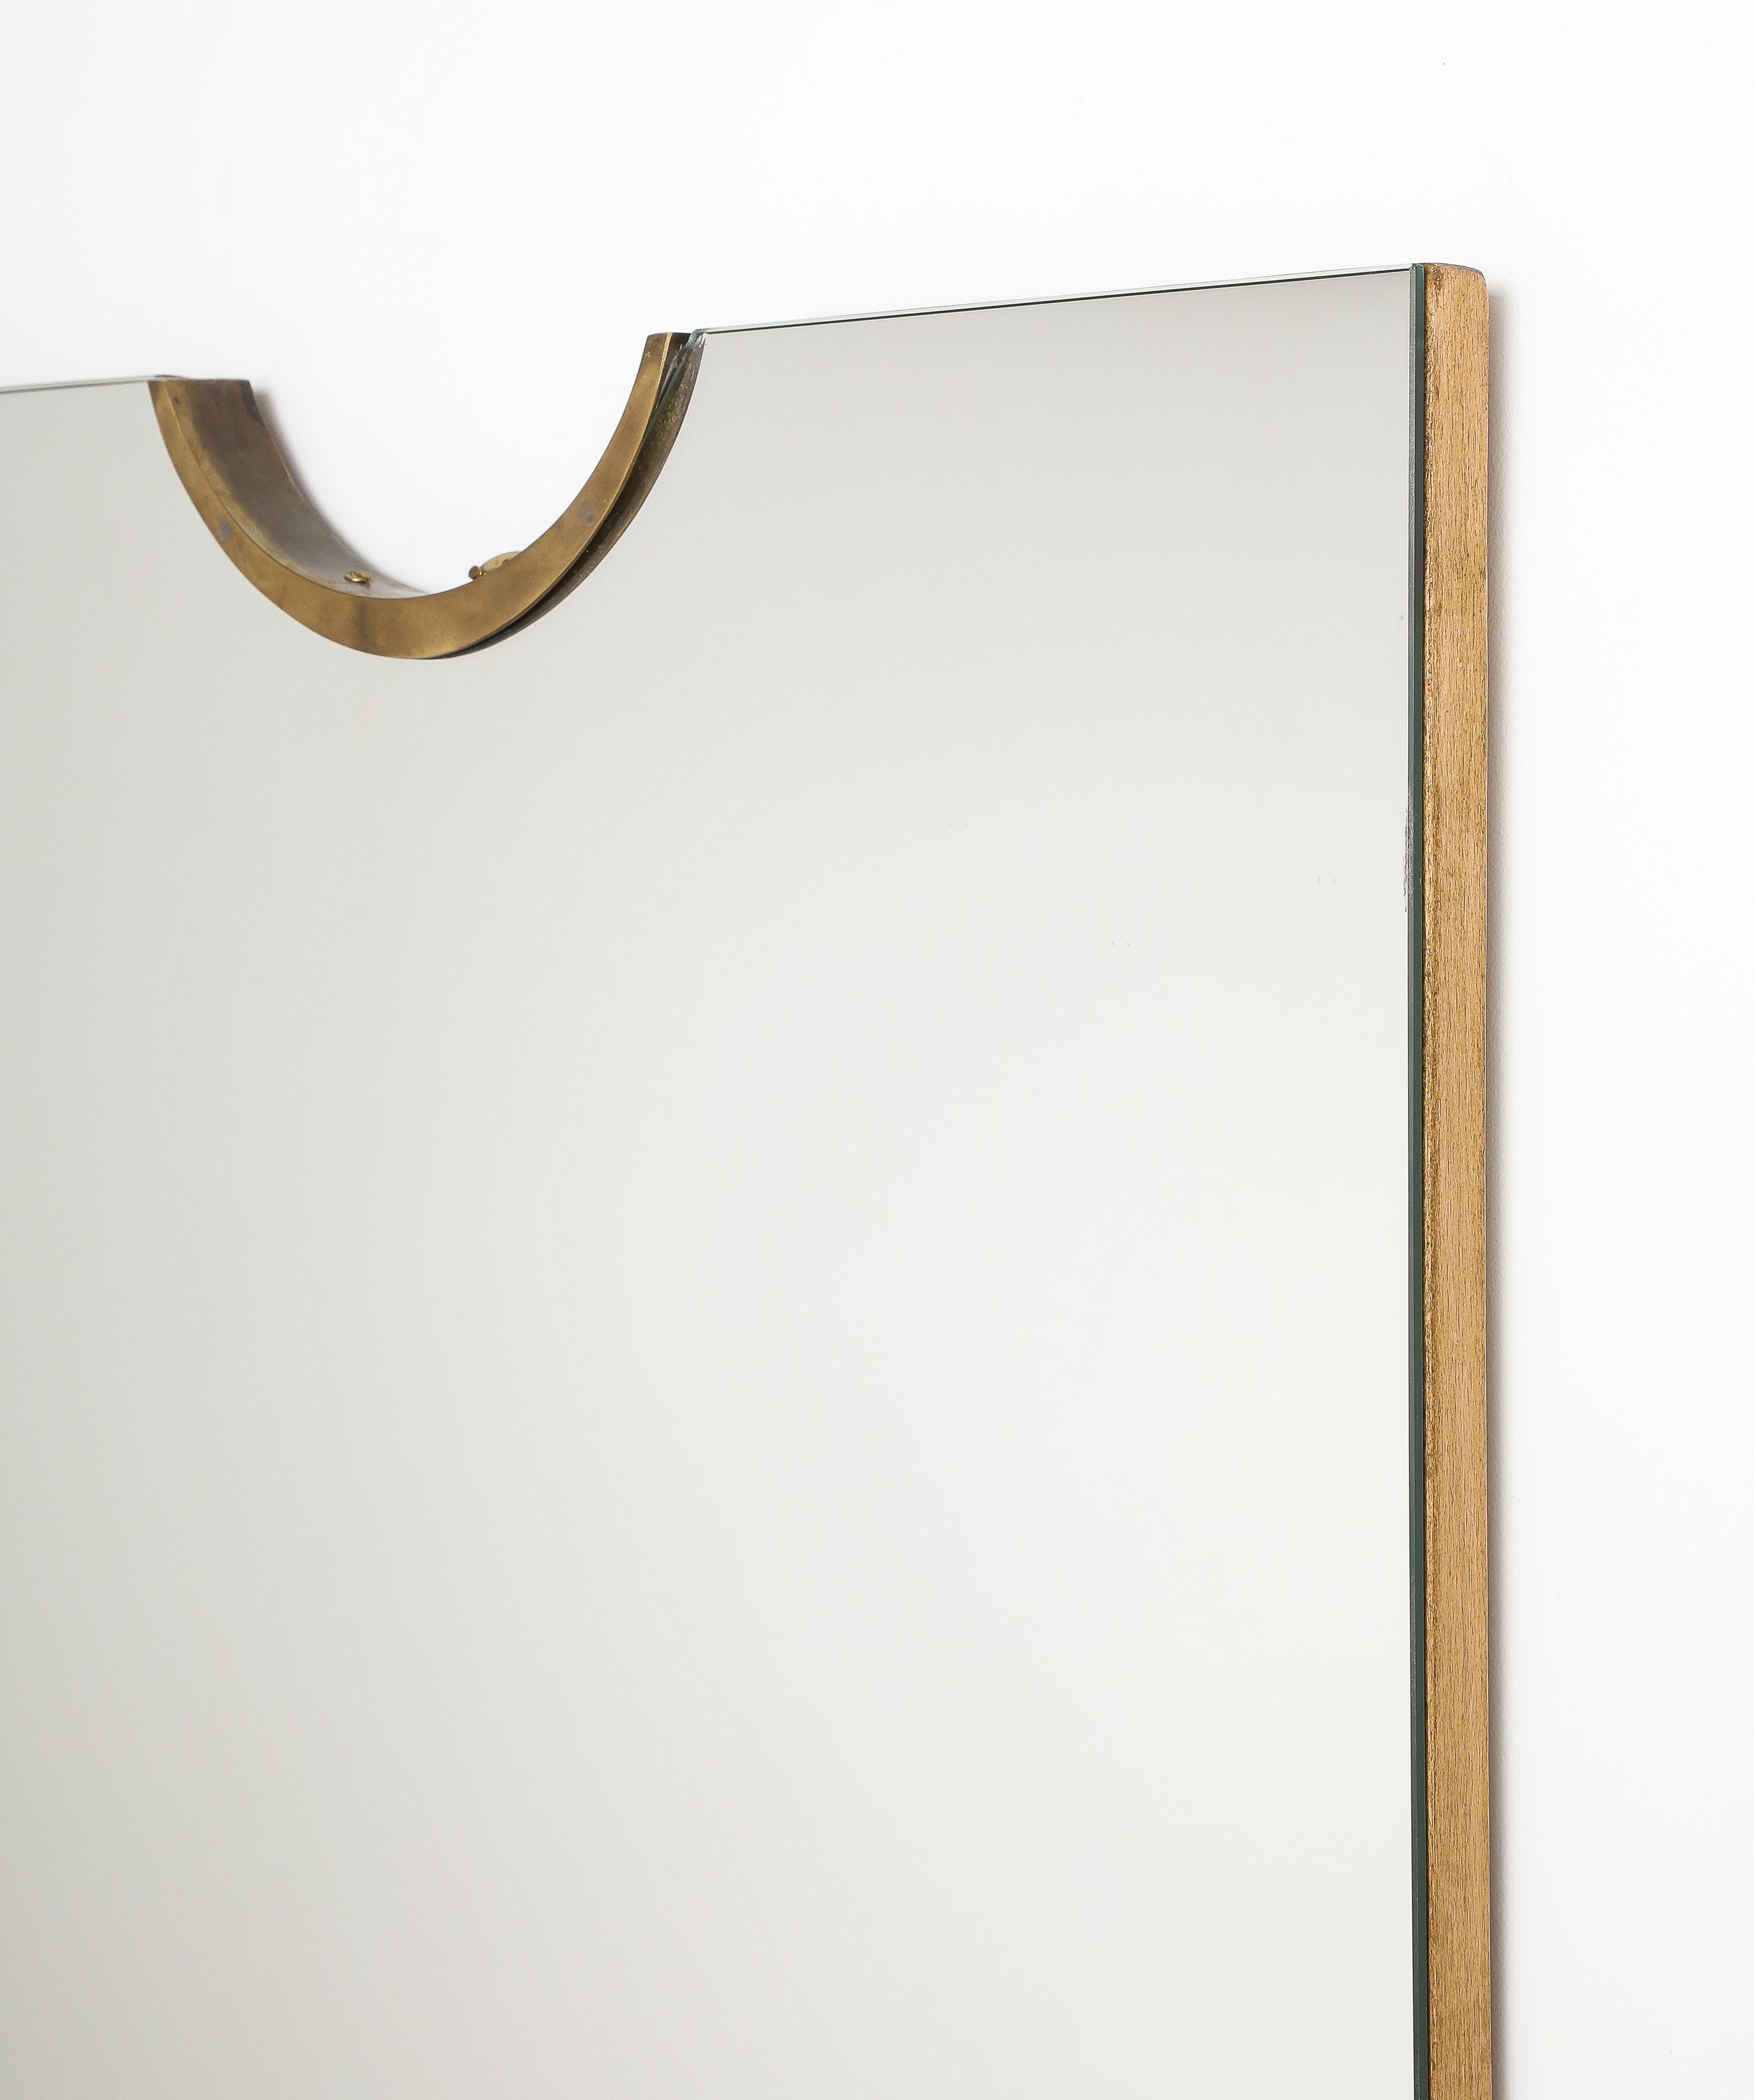 Late 20th Century Pair of Italian Modernist Glass and Brass Wall Mirrors, circa 1970 